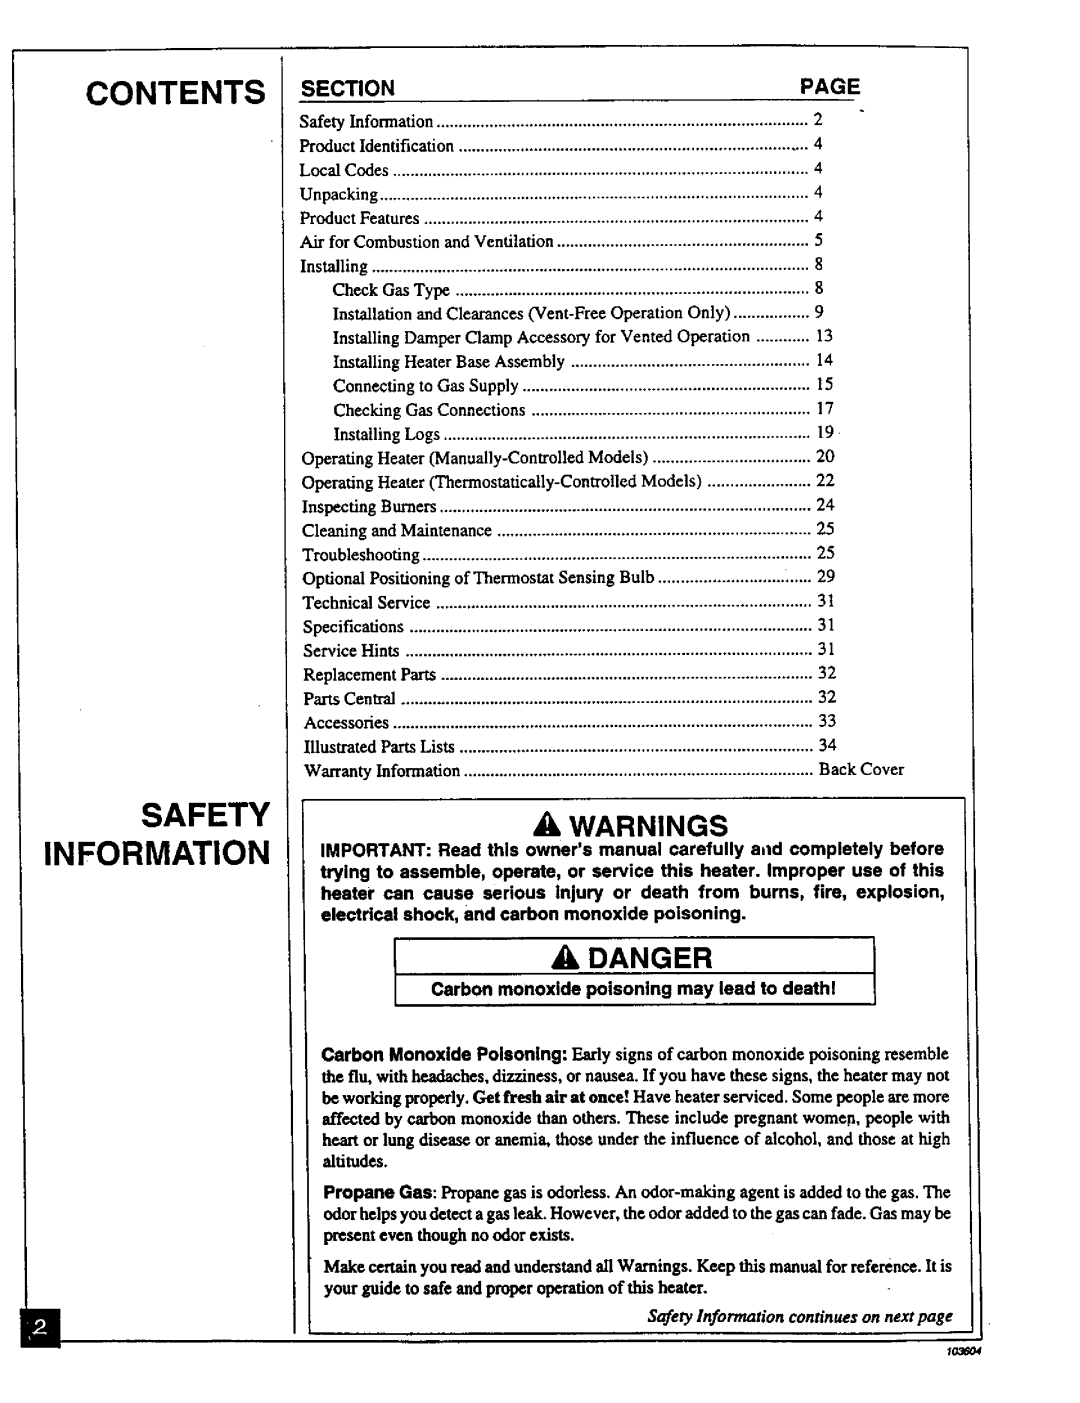 Desa Tech CGD3924PT, CGD3930PT Contents, Awarnings, Adanger, Safety Information continues on next page 